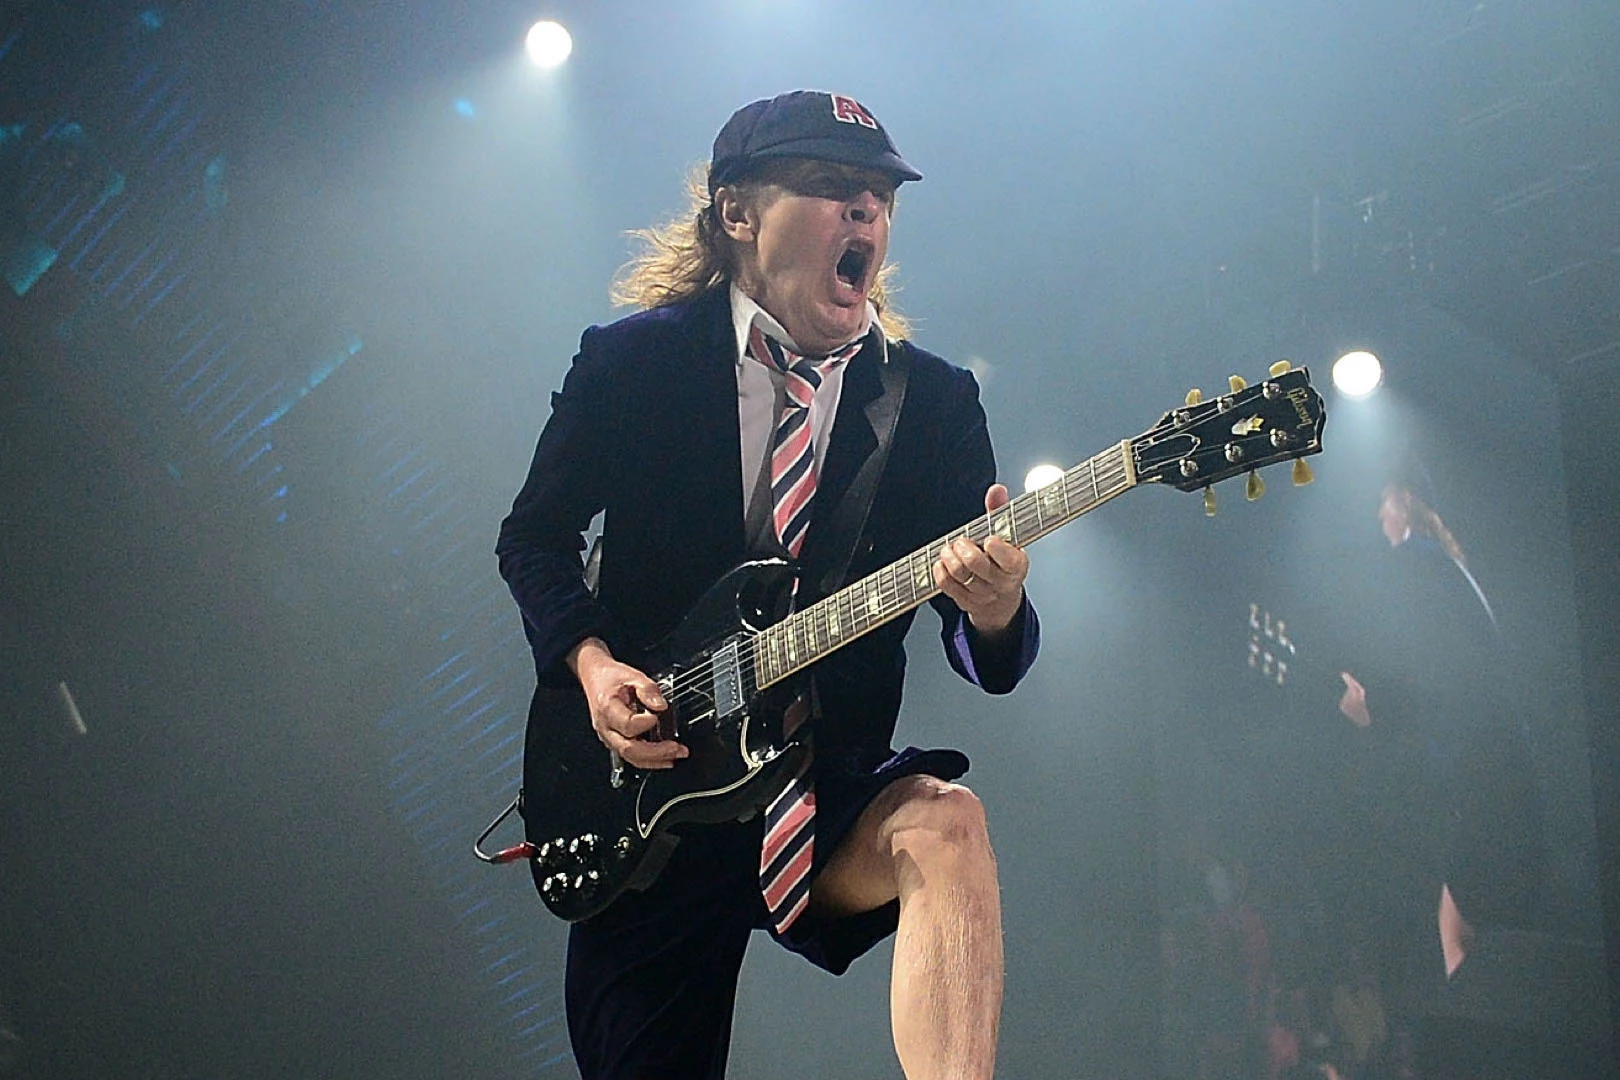 Unearthed Interview - How Angus Adopted AC/DC Schoolboy Image